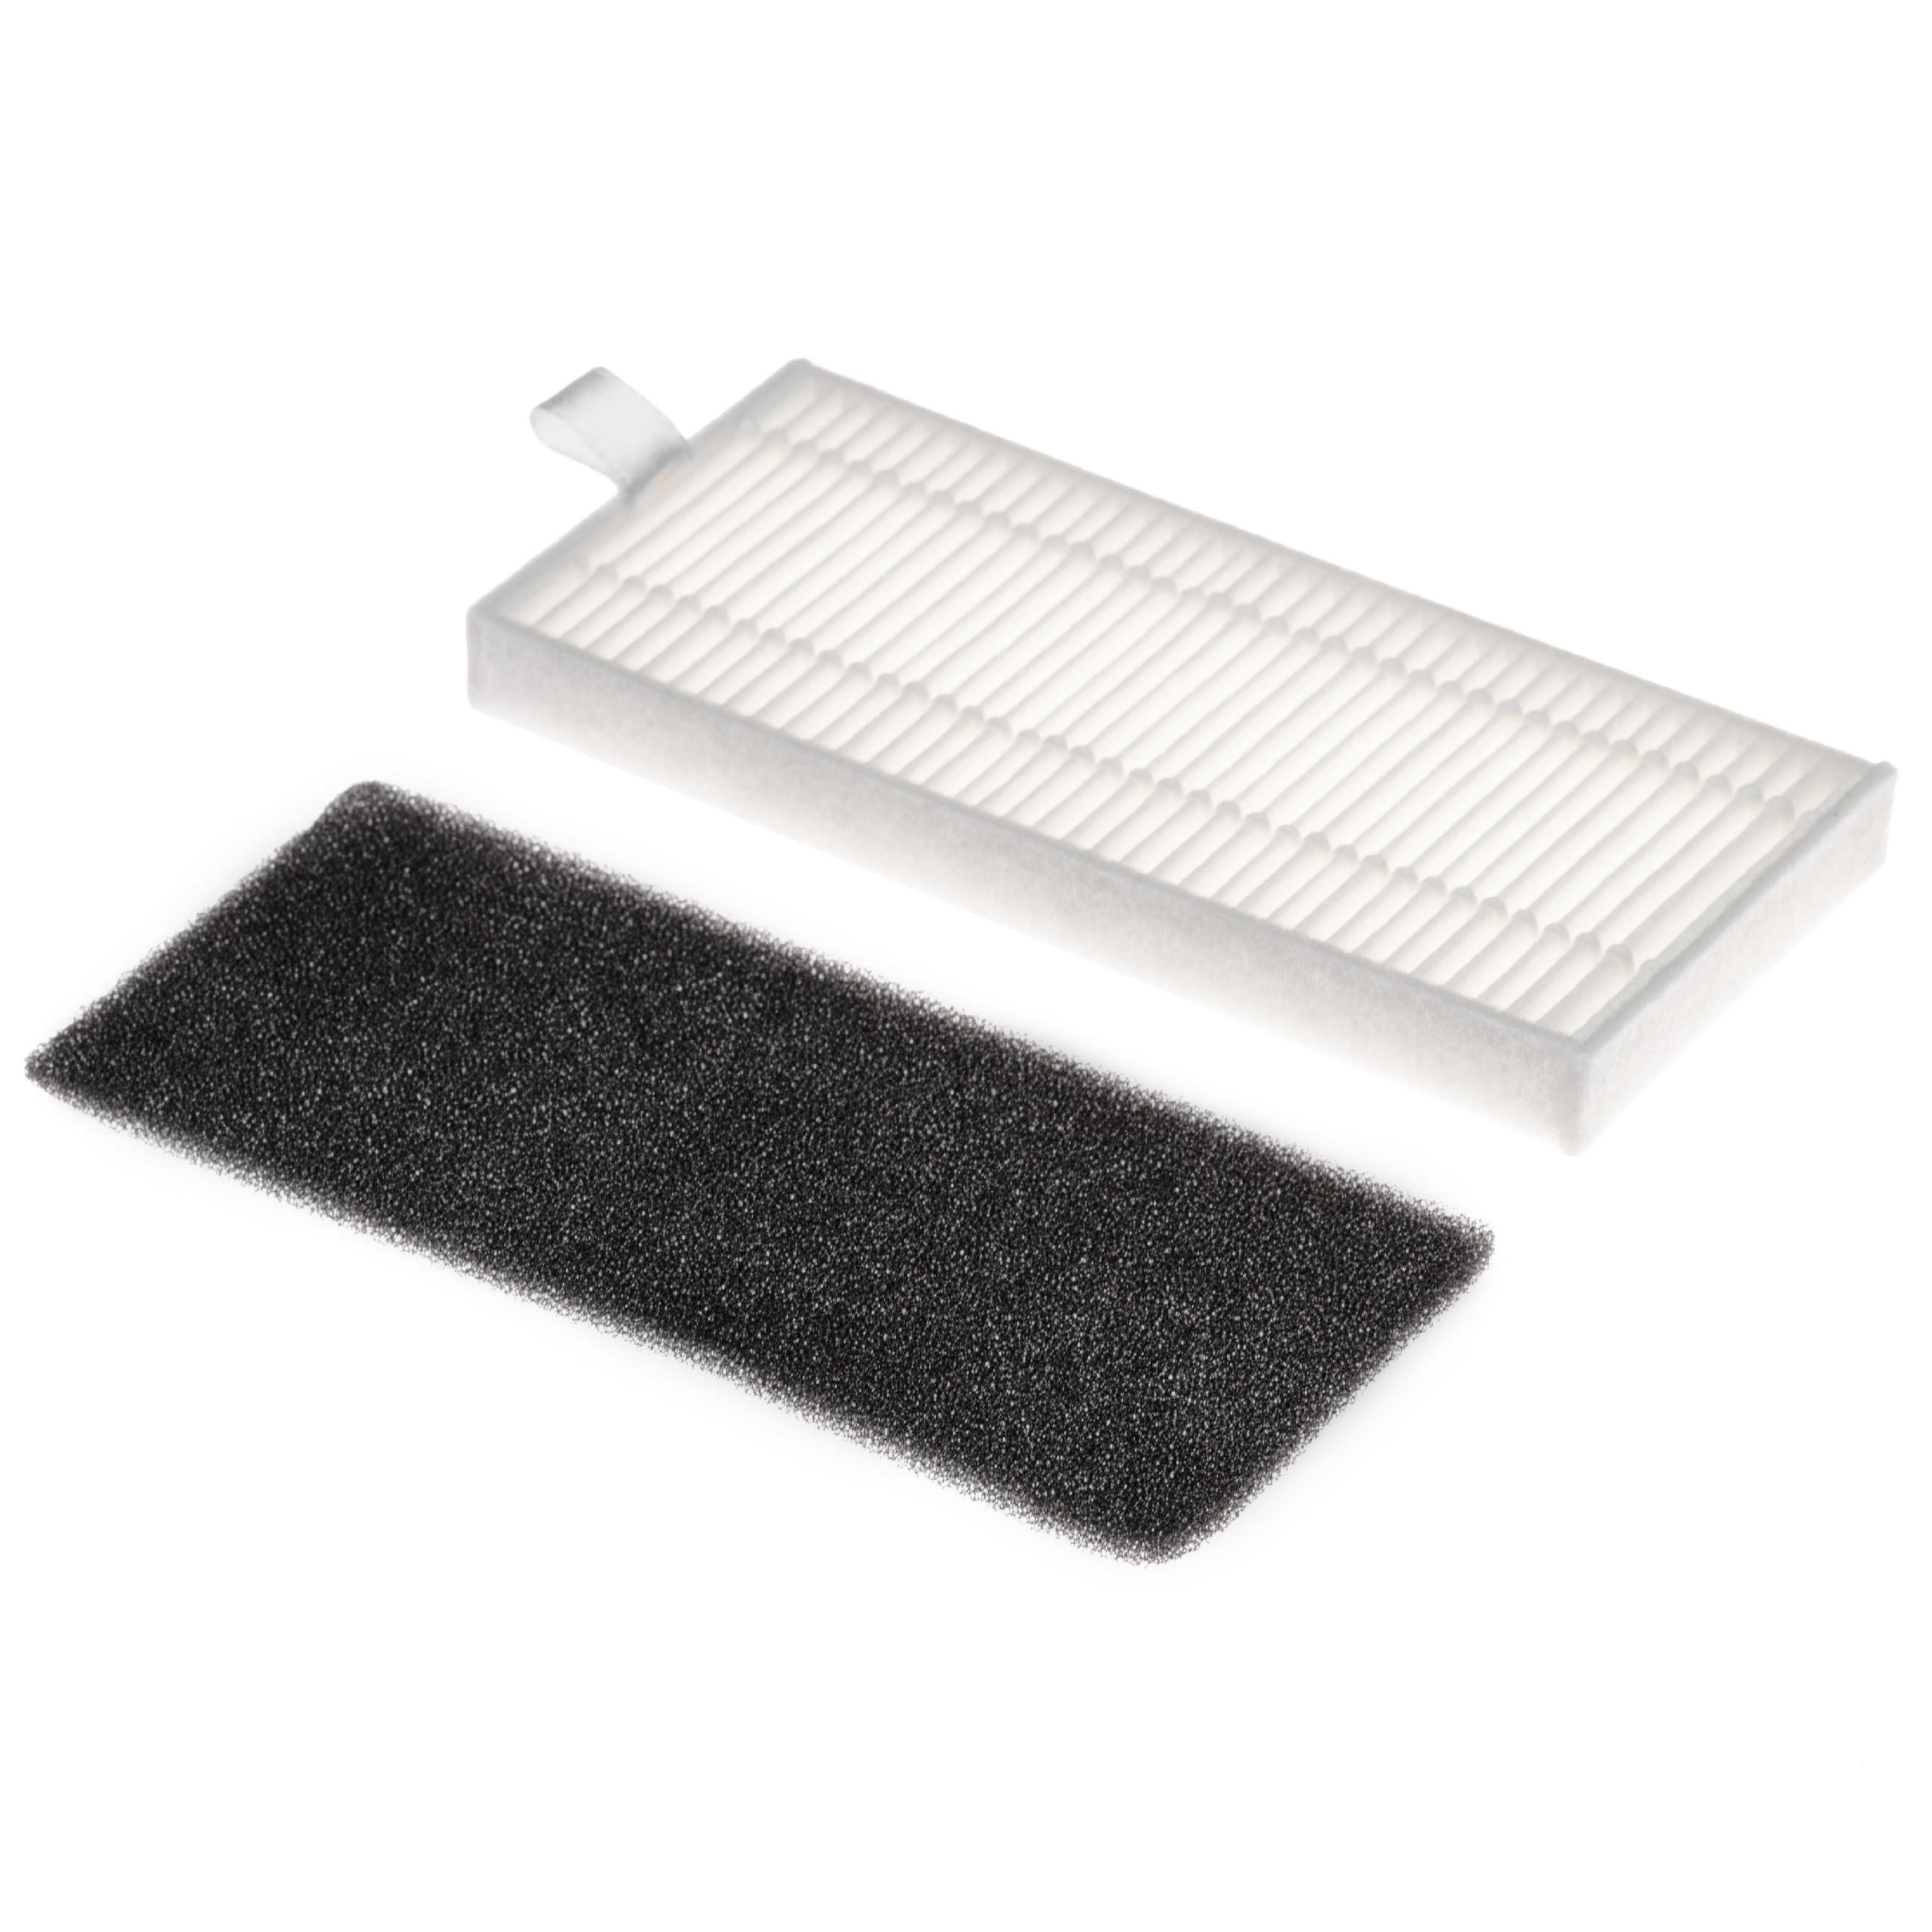 2x HEPA filter / foam filter replaces Ecovacs BS280 for Tesvor Vacuum Cleaner